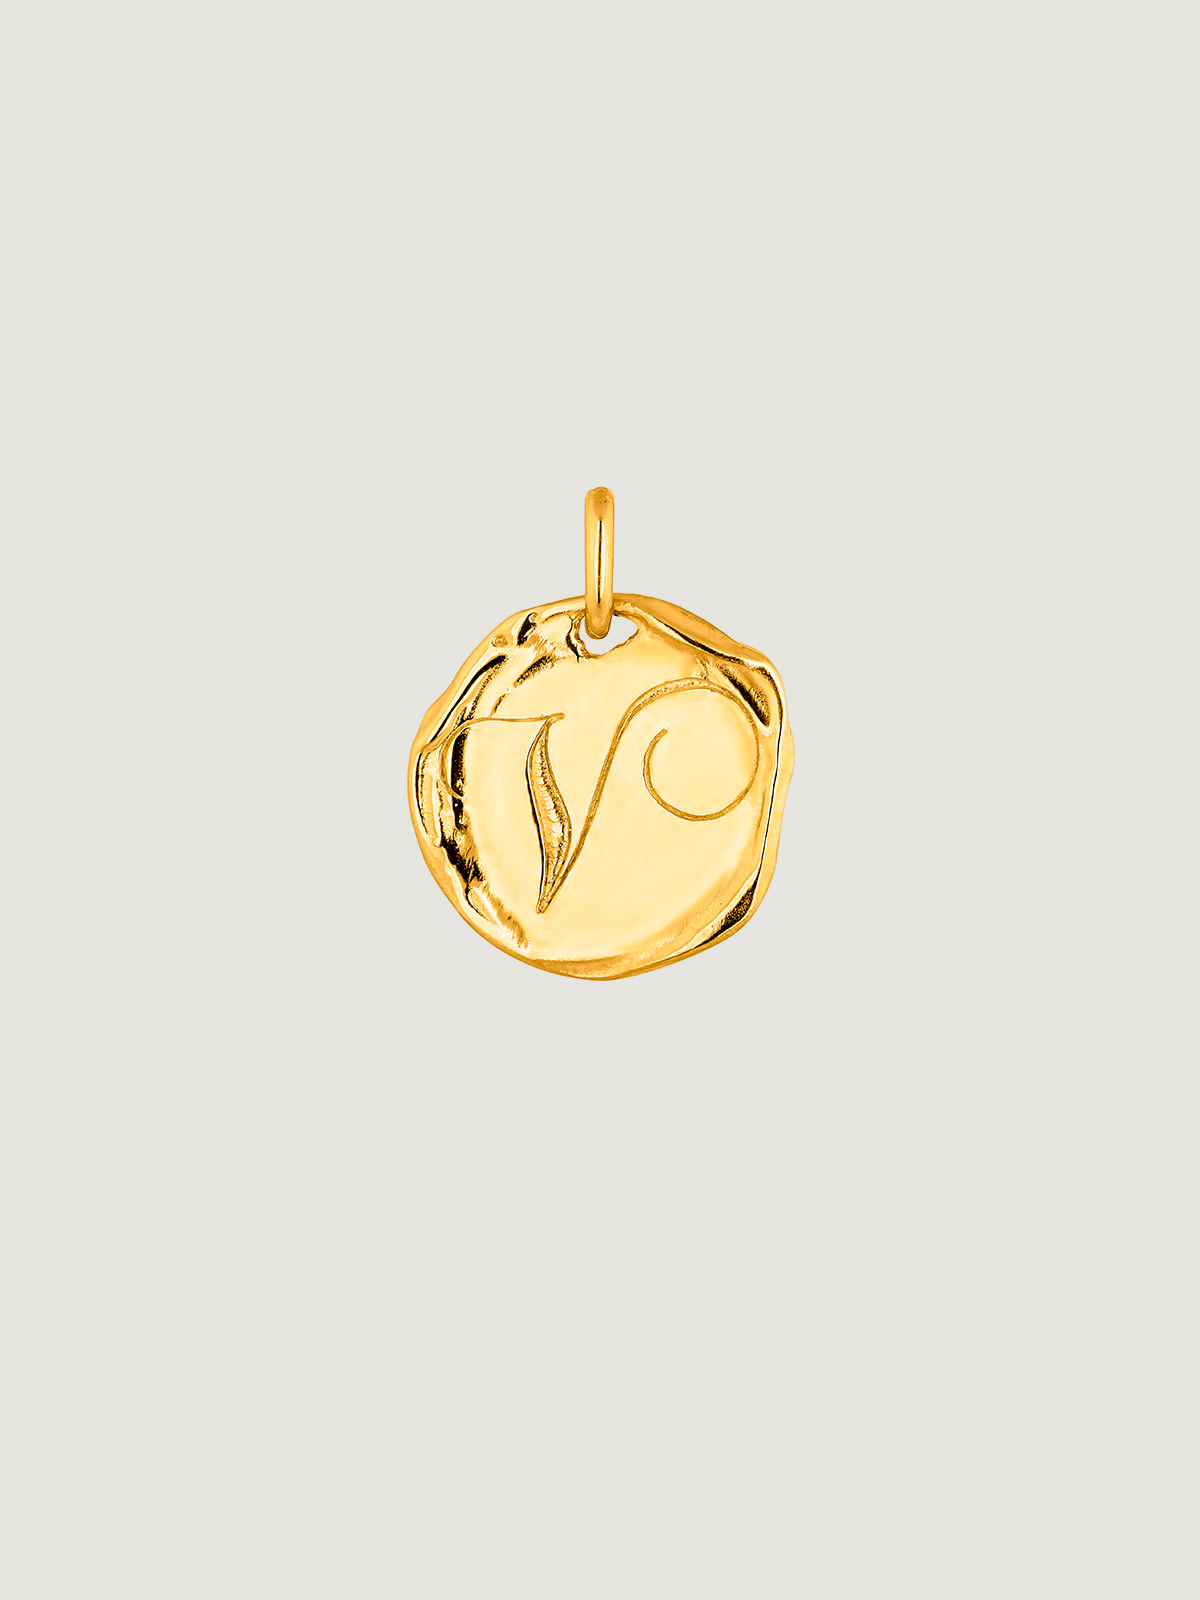 Handcrafted charm made from 925 silver, coated in 18K yellow gold with the initial 'V'